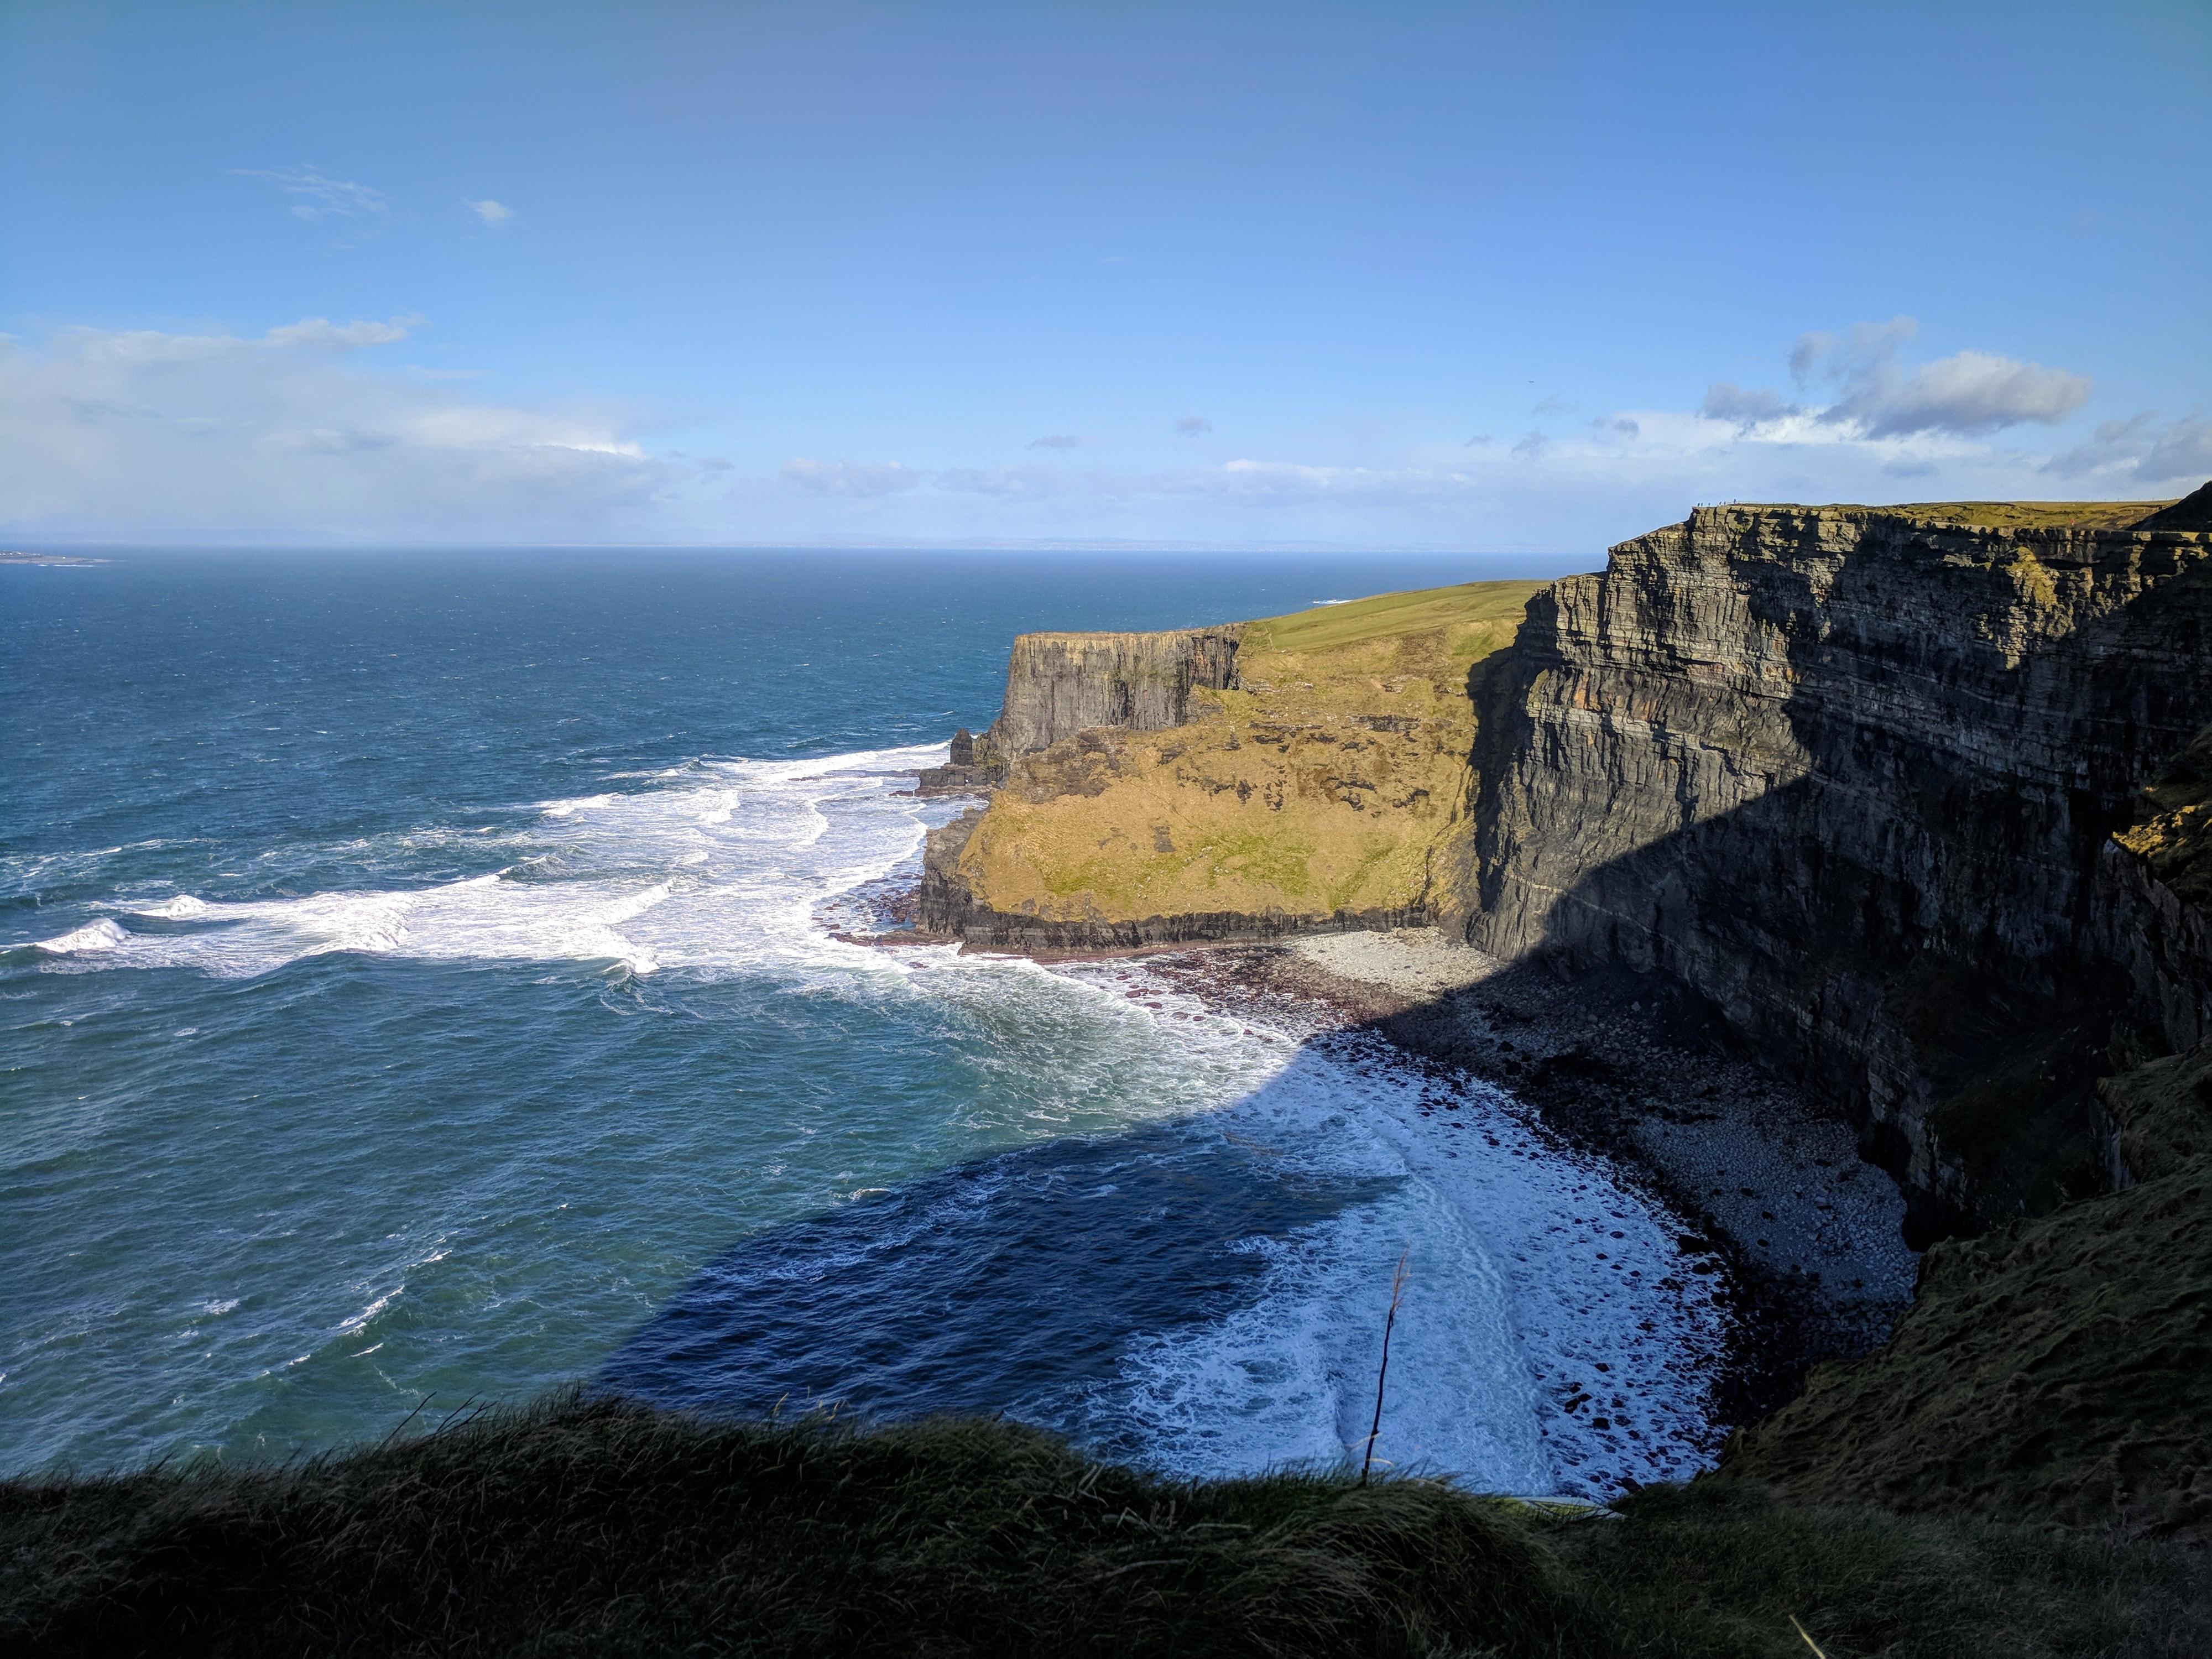 Lucky sunny break in winter at the Cliffs of Moher, Ireland ...